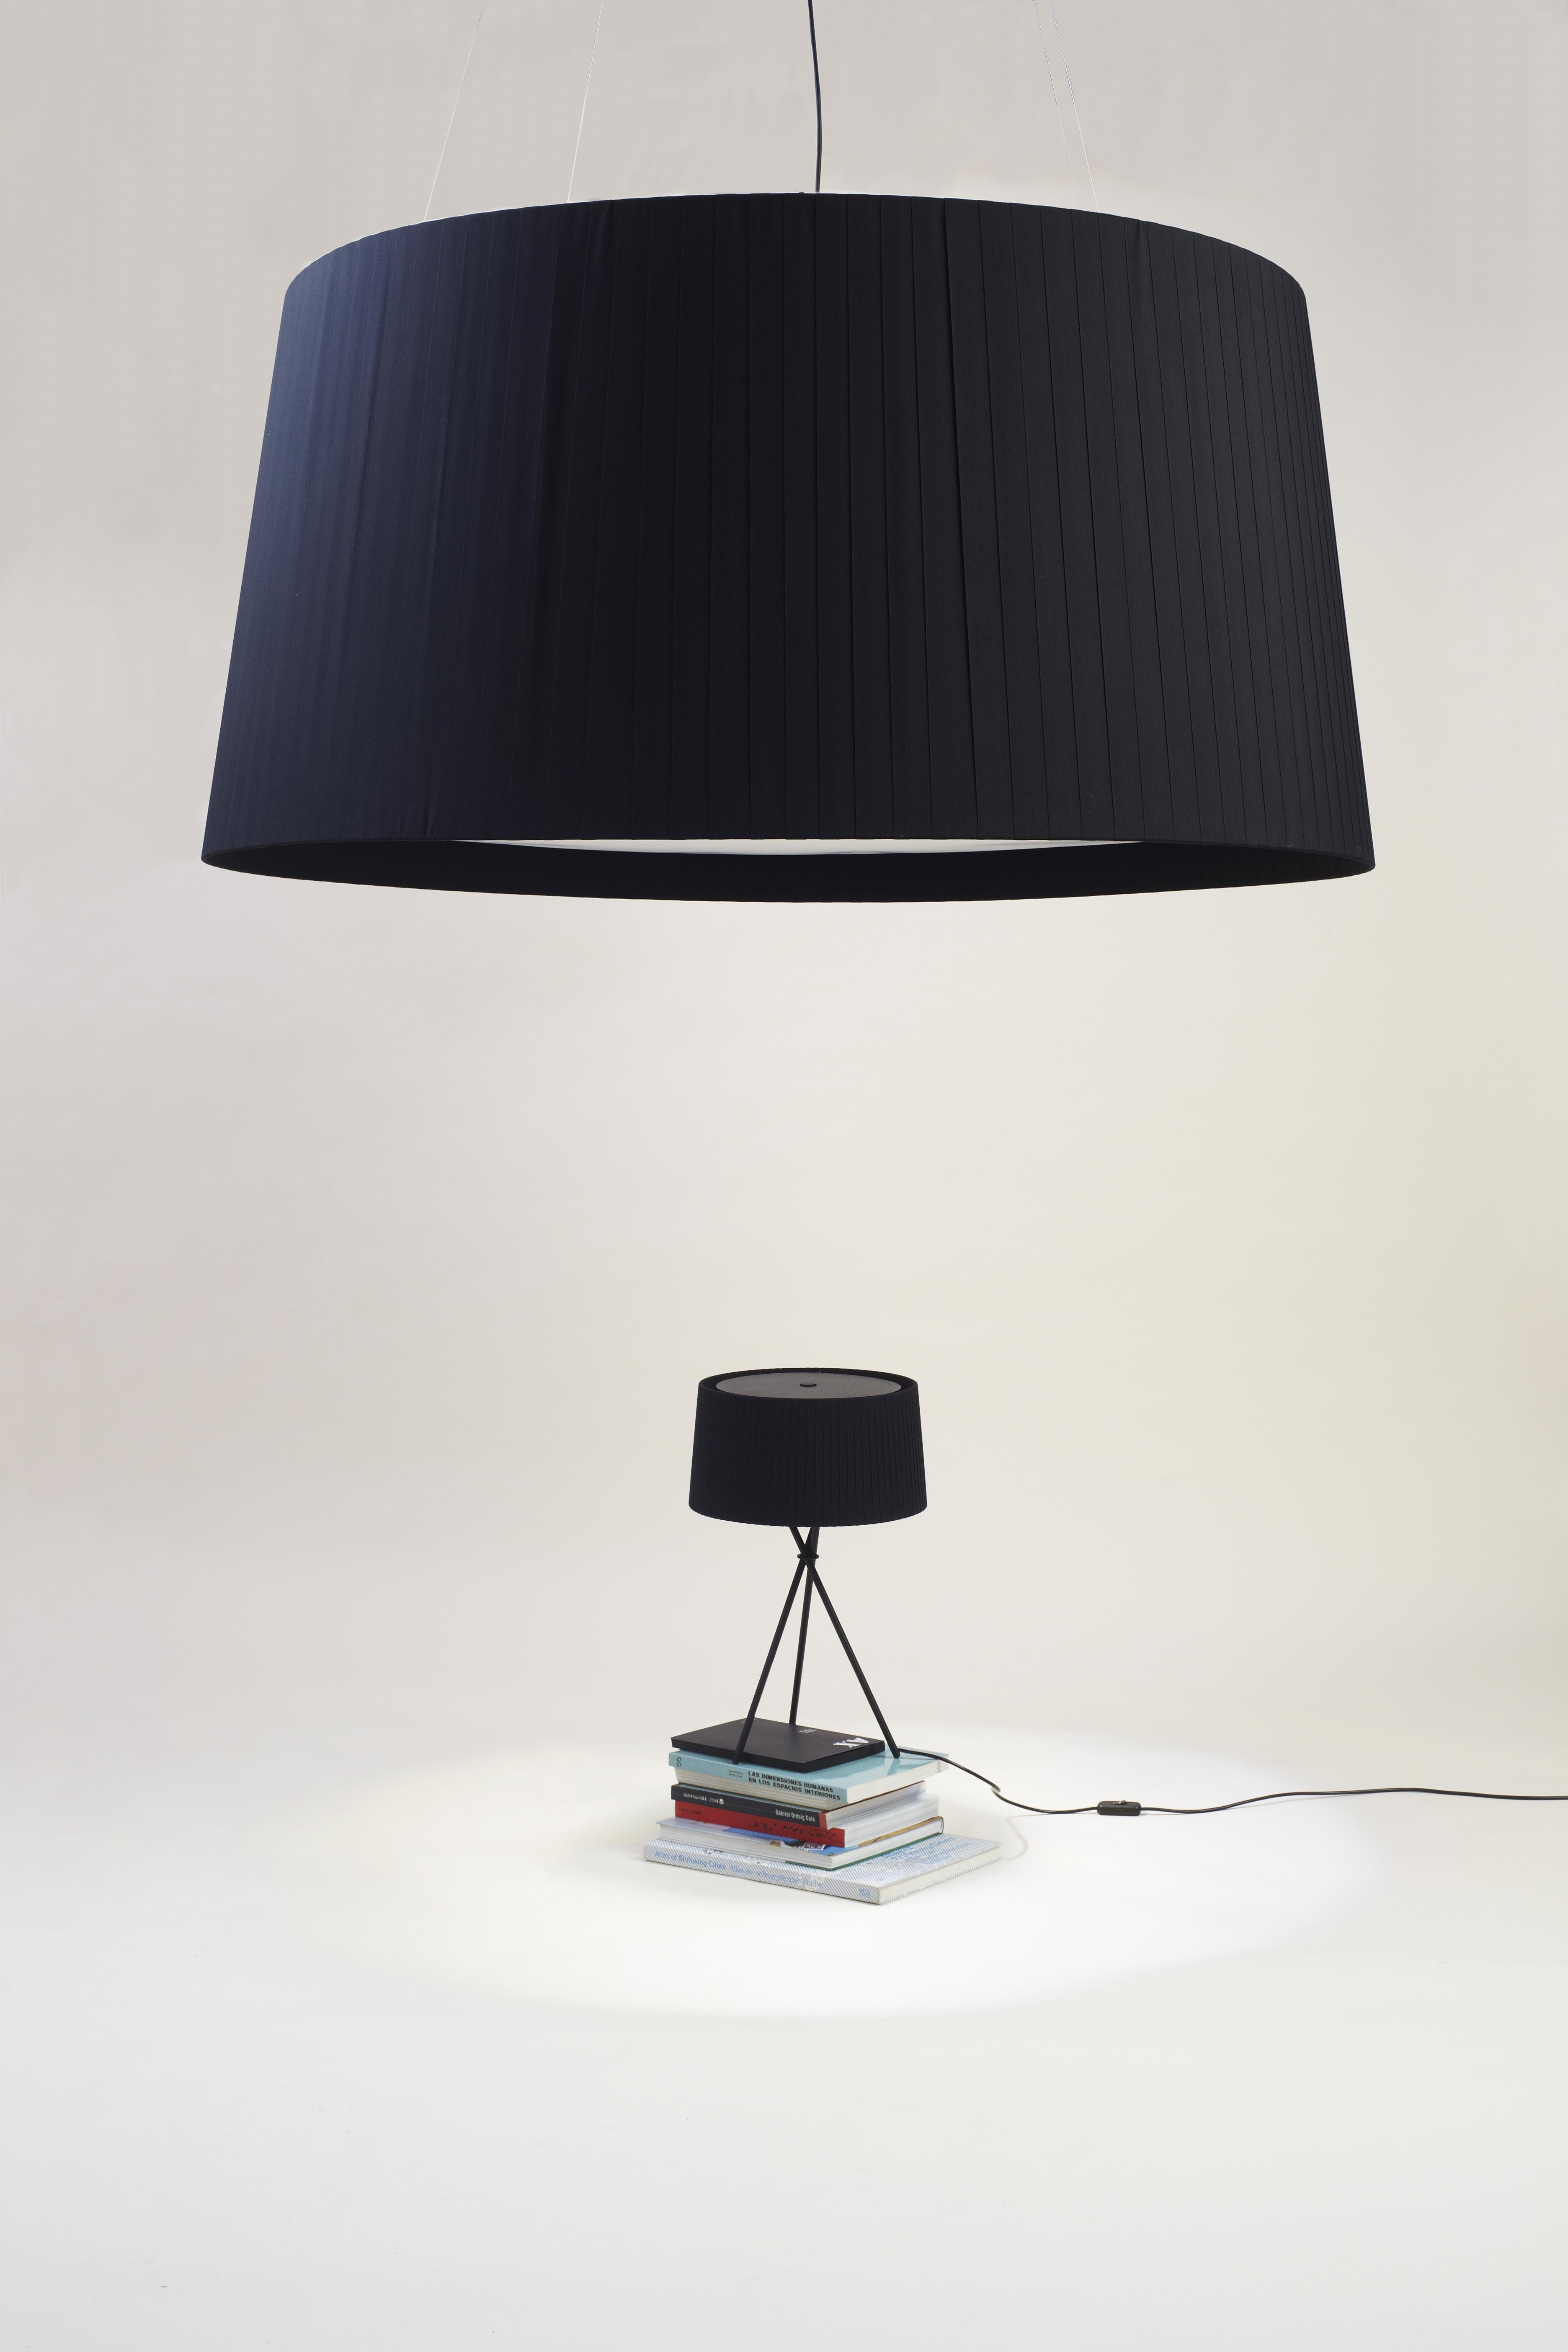 Black GT1500 pendant lamp by Santa & Cole.
Dimensions: D 150 x H 74 cm
Materials: Metal, ribbon.
Available in other colors.

Two lamps with voluminous, beribboned shades, designed for large-scale projects. Both feature a large, translucent disc